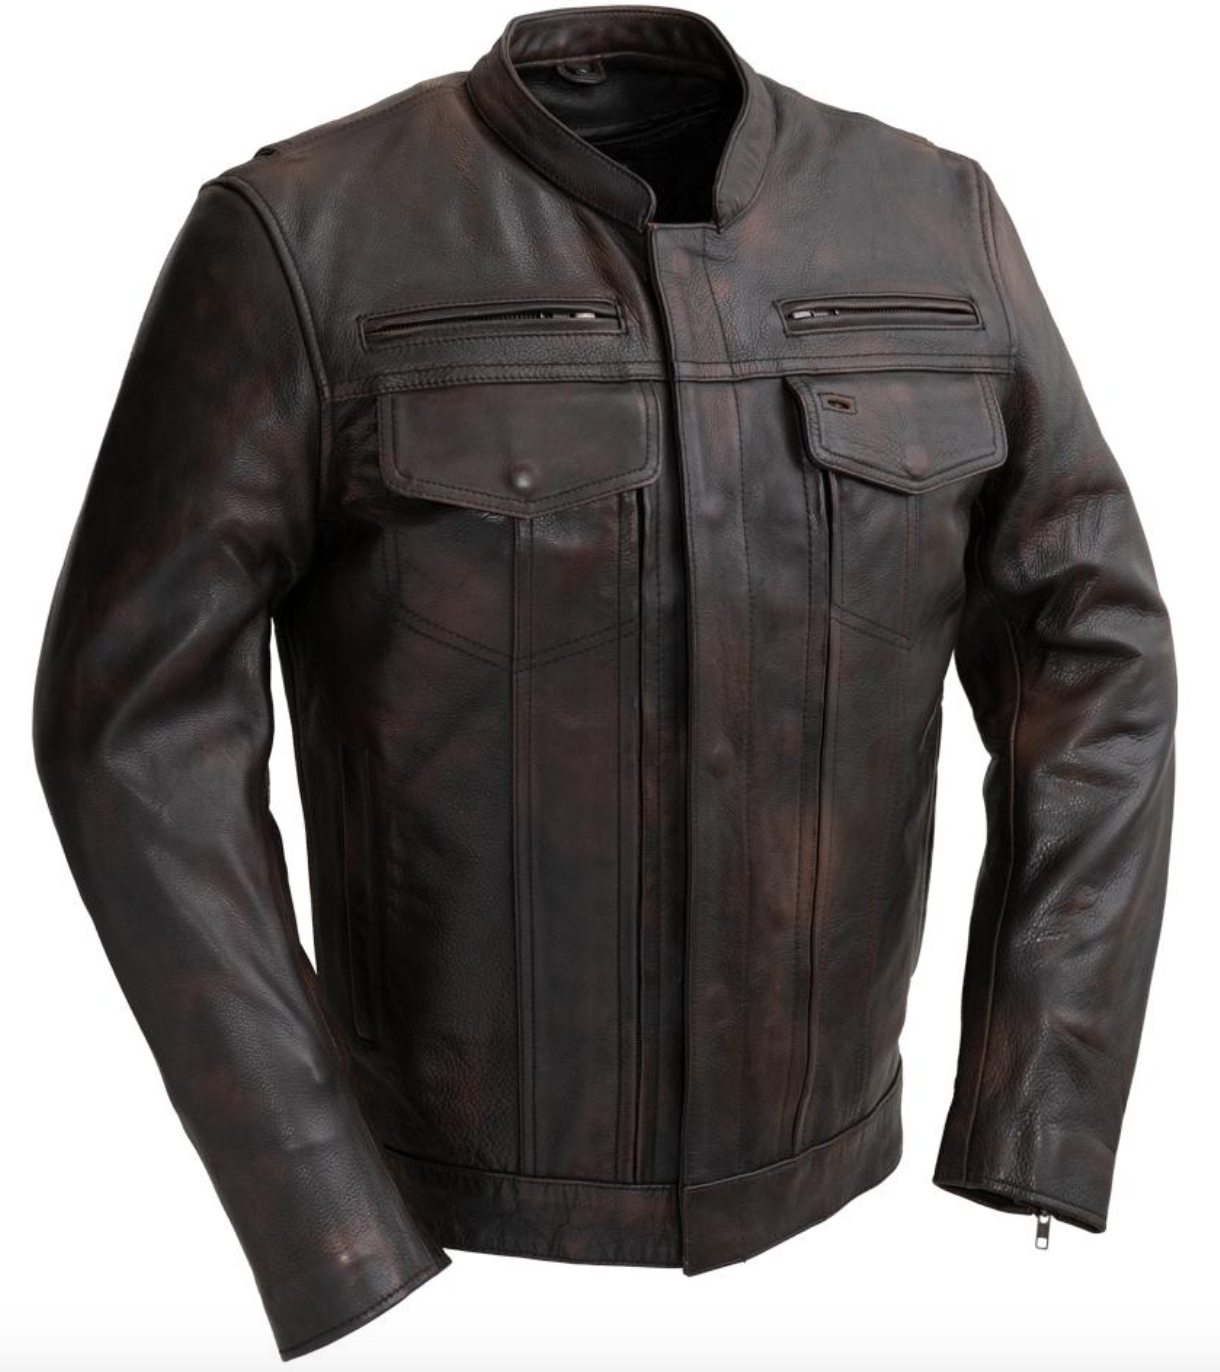 The Raider - Men's Motorcycle Leather Jacket - Copper